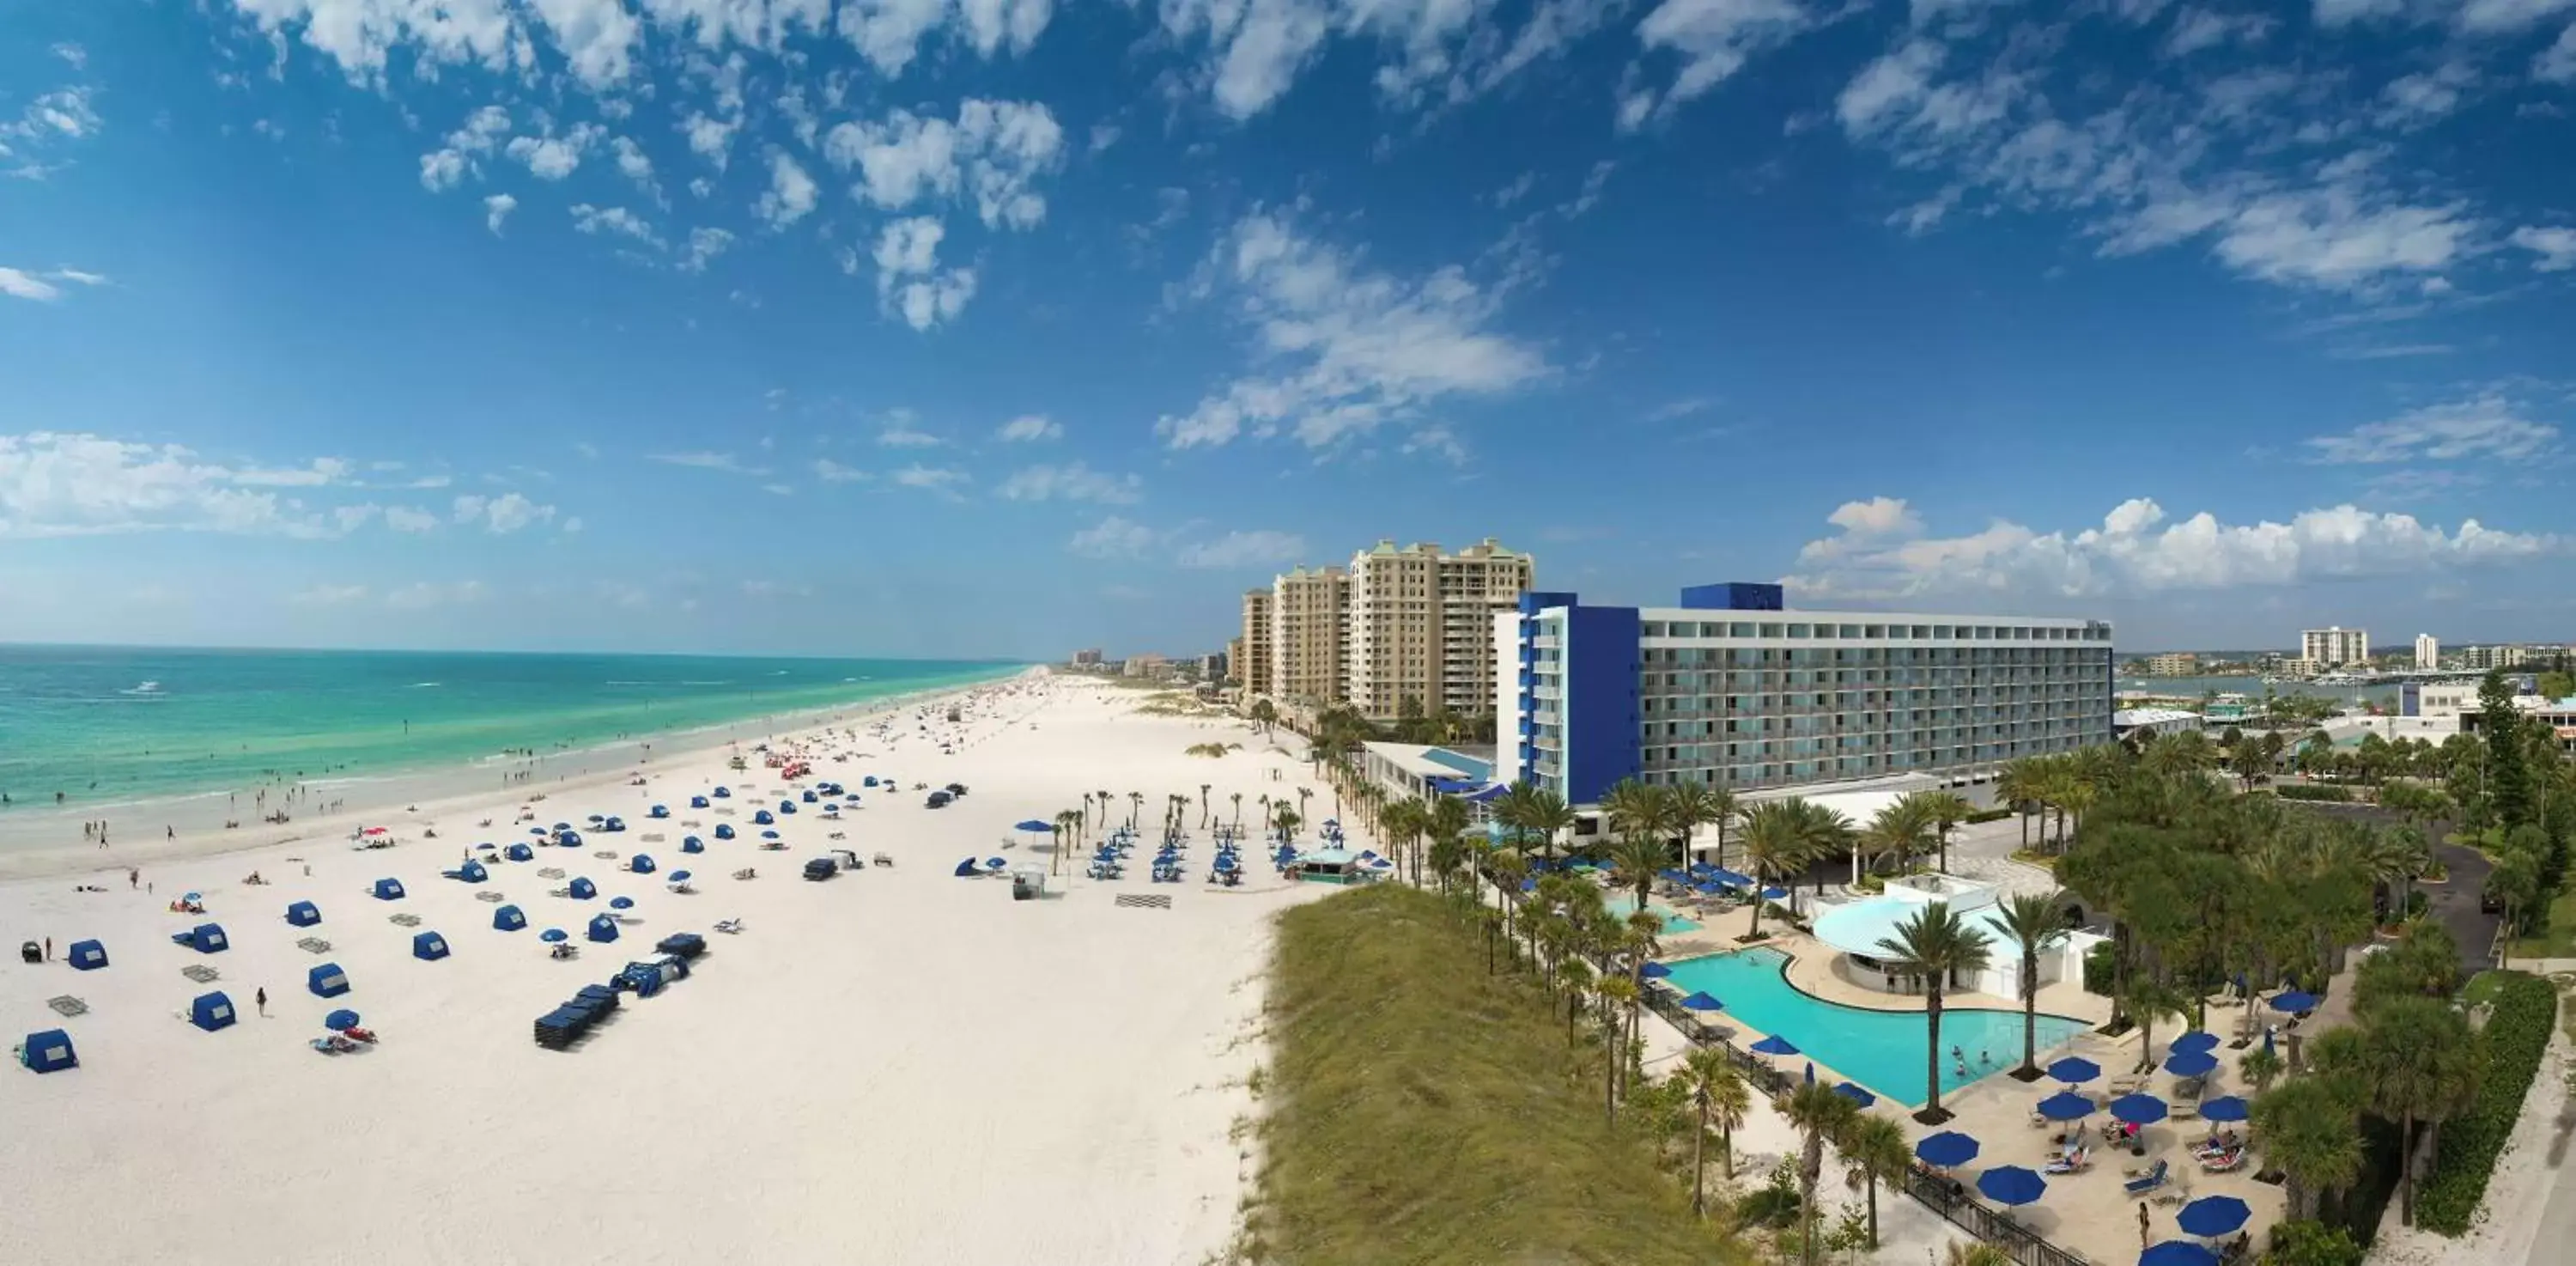 Property building, Pool View in Hilton Clearwater Beach Resort & Spa